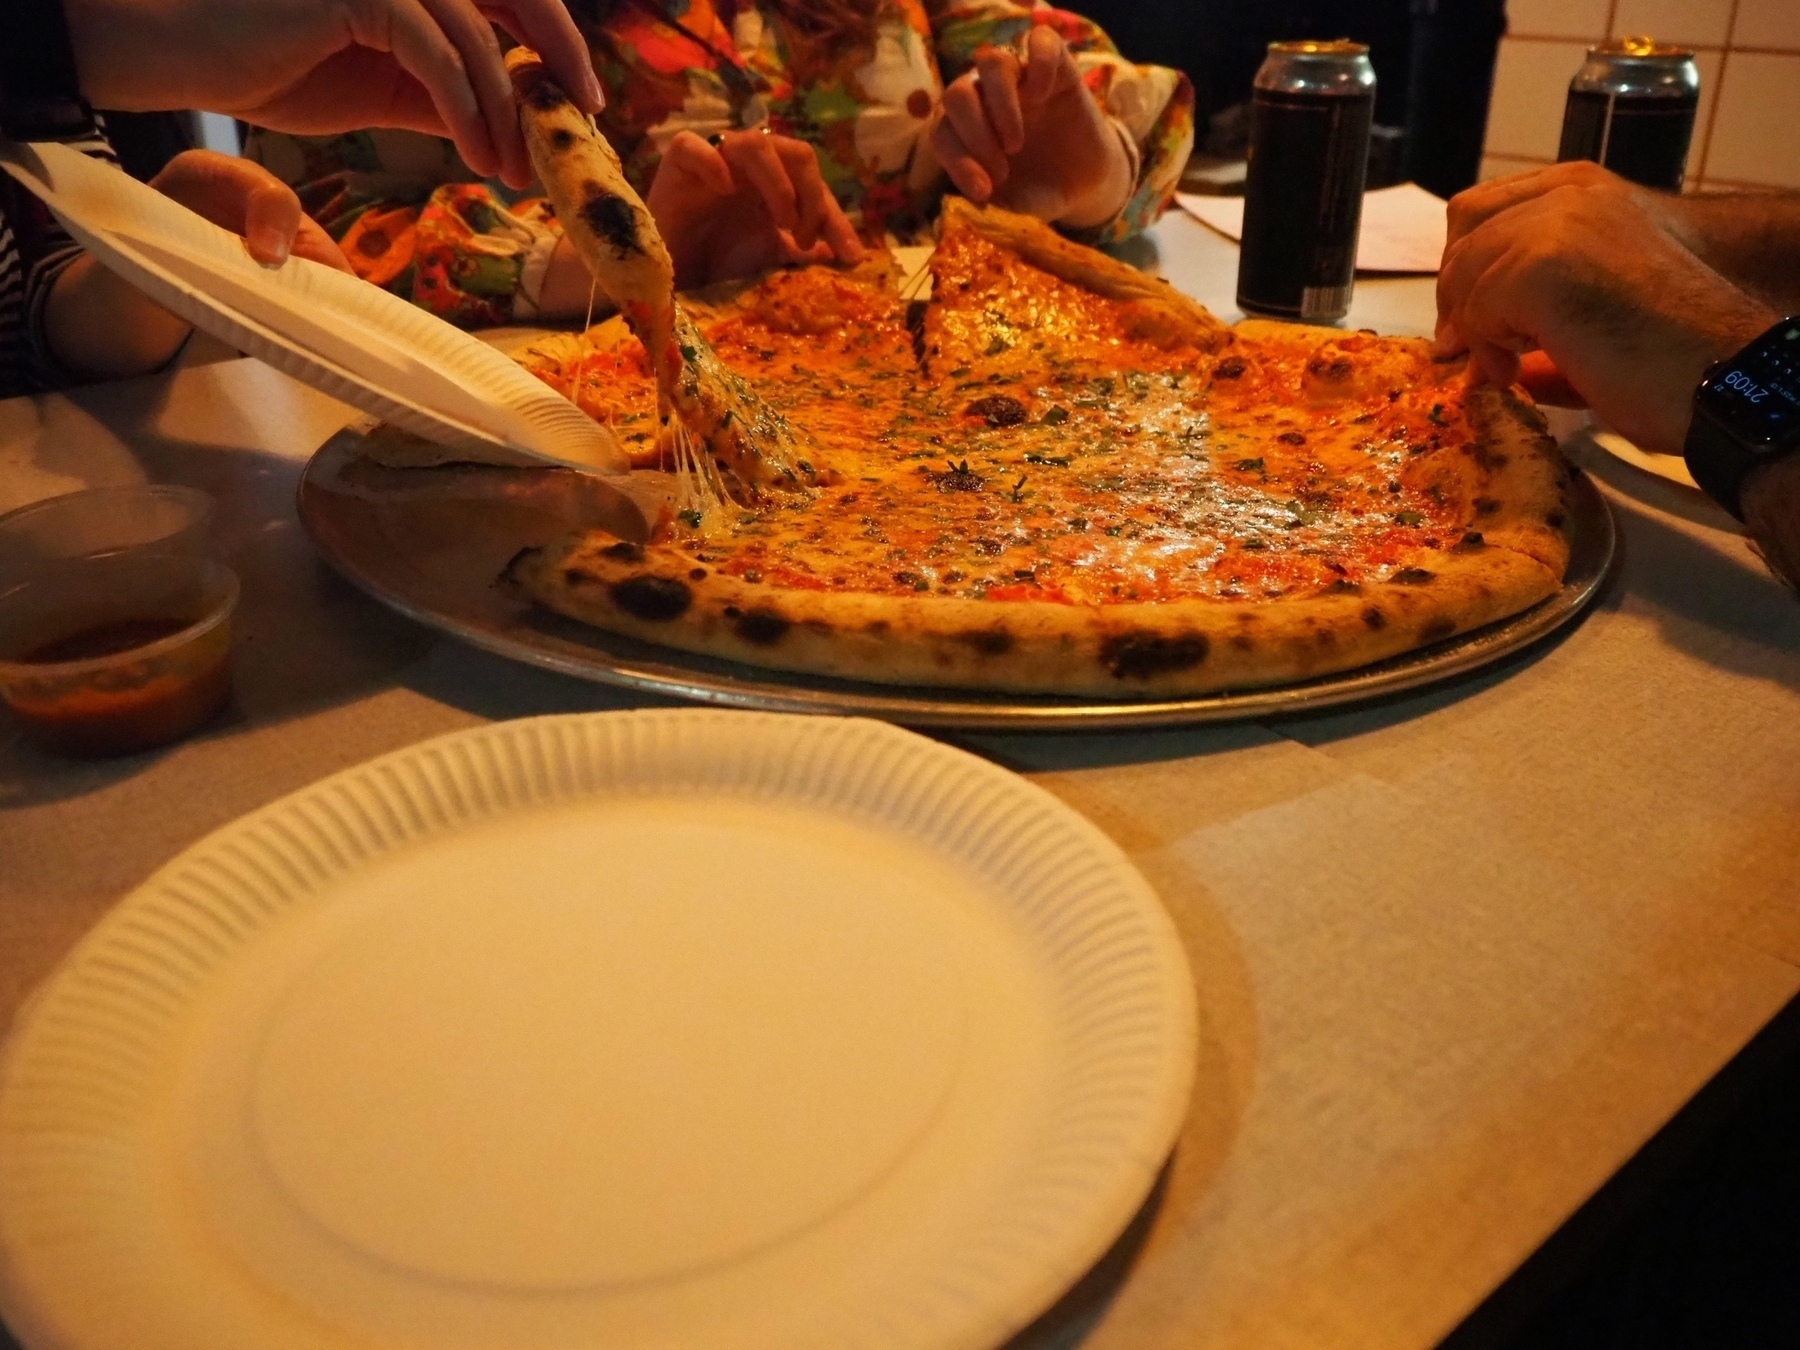 Large pizza, people picking slices on each side